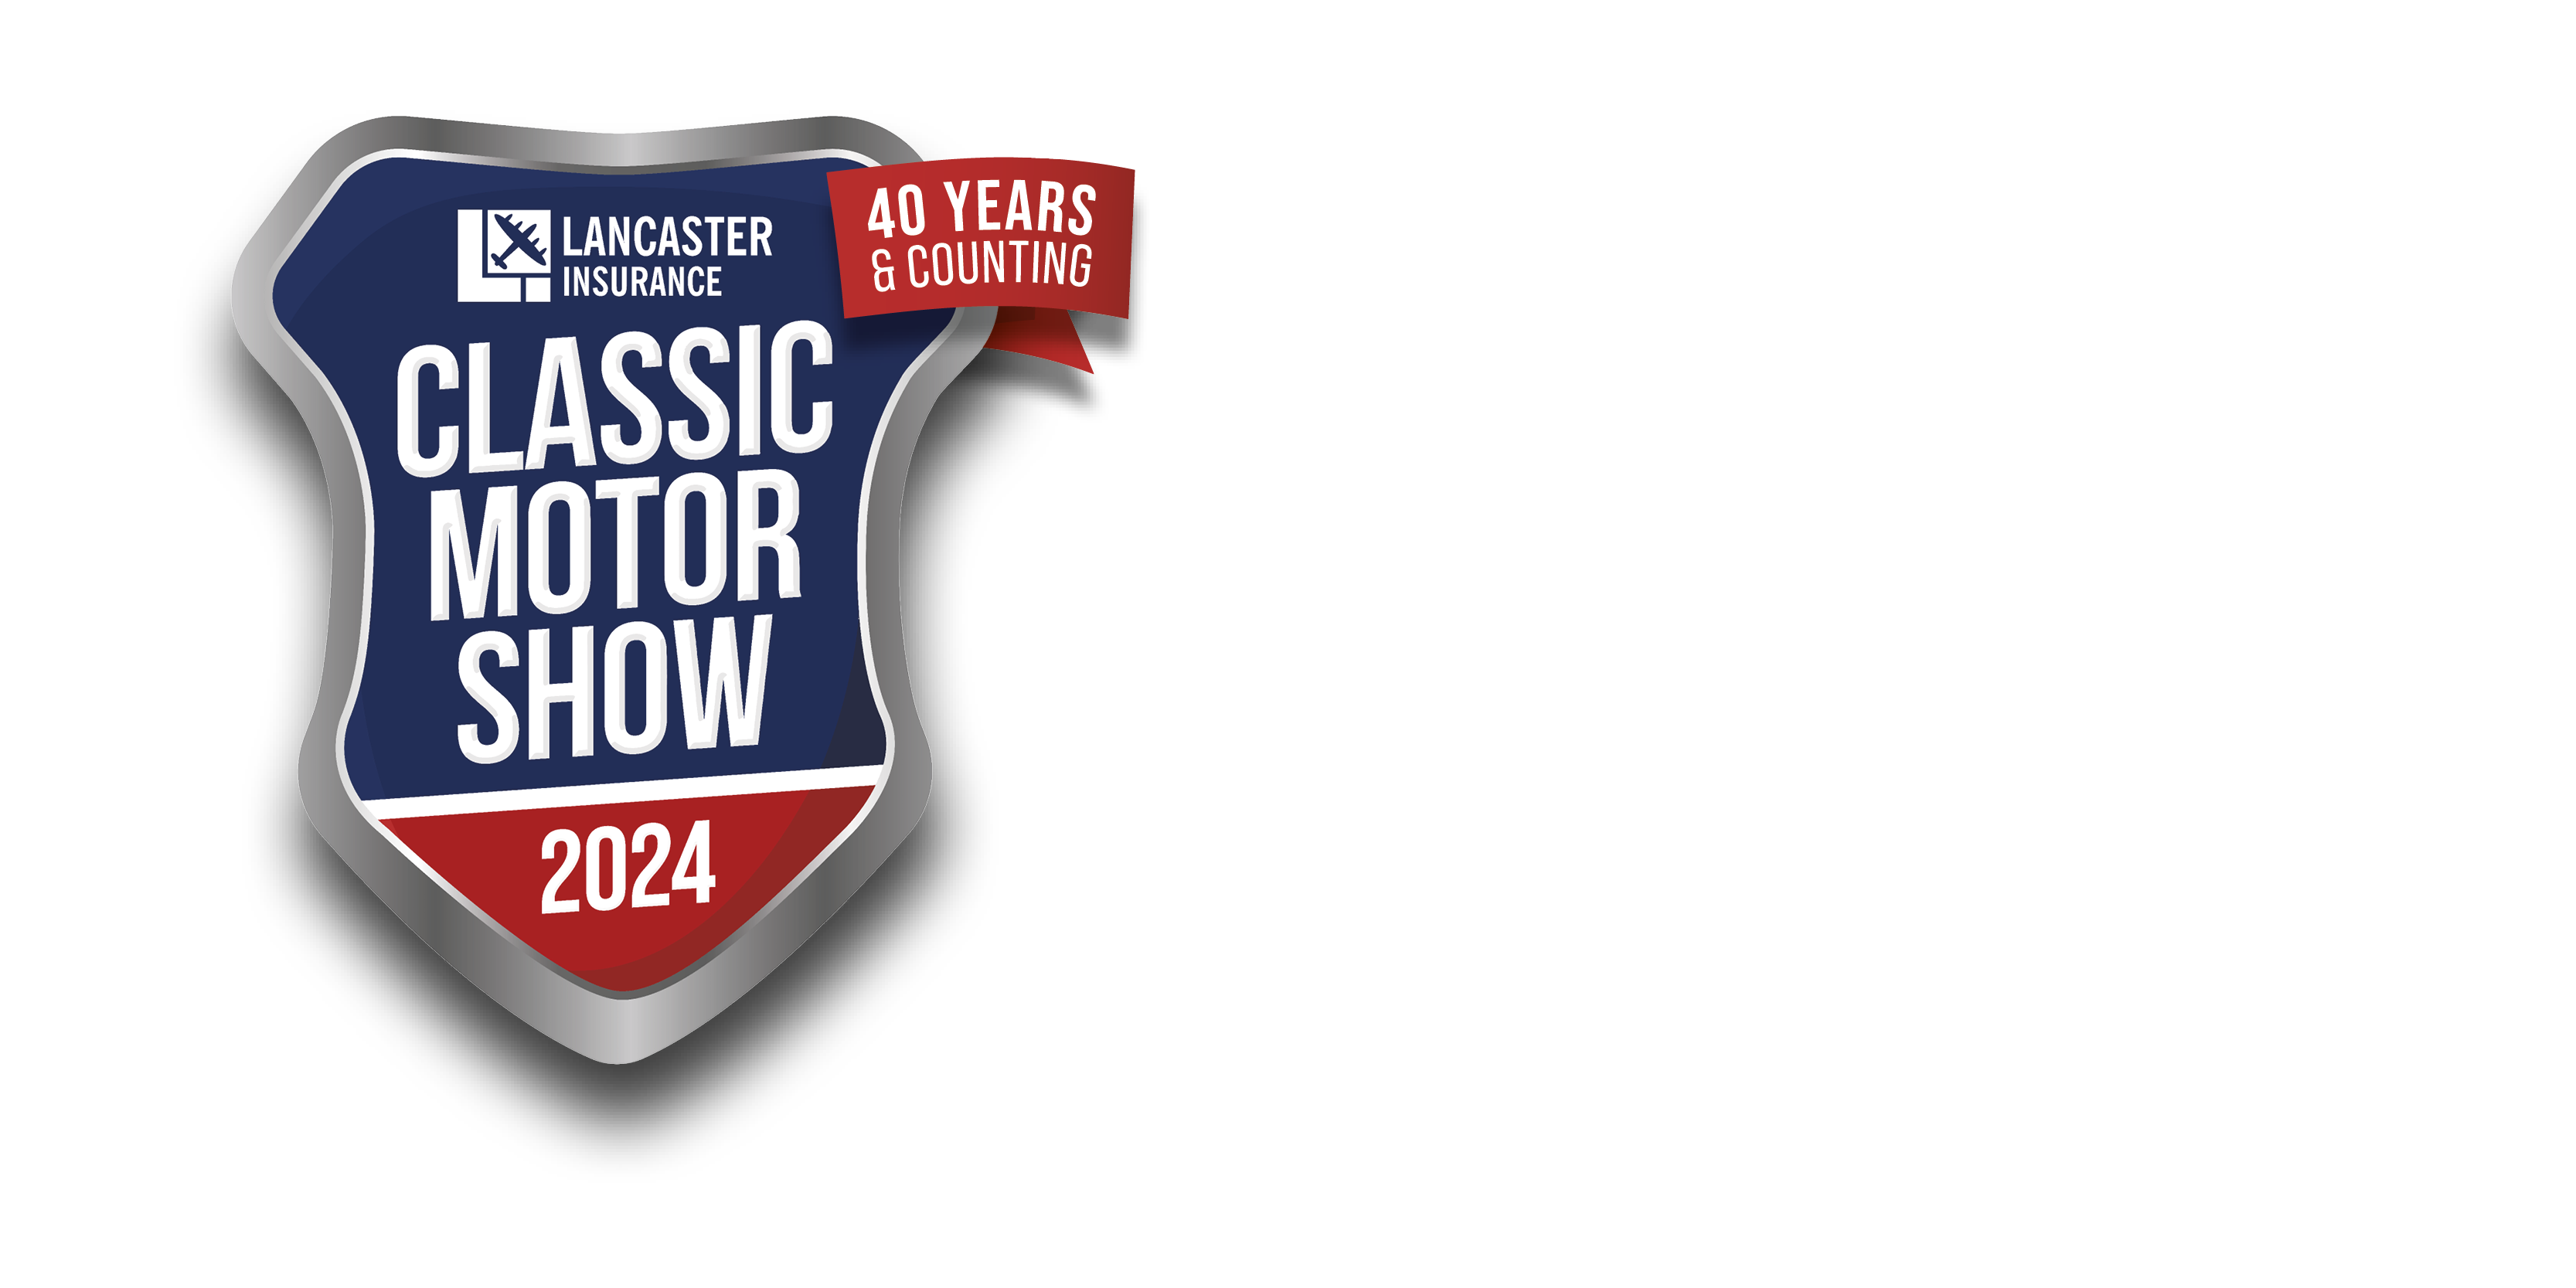 Classic Motor Show and Lancaster Insurance Logo